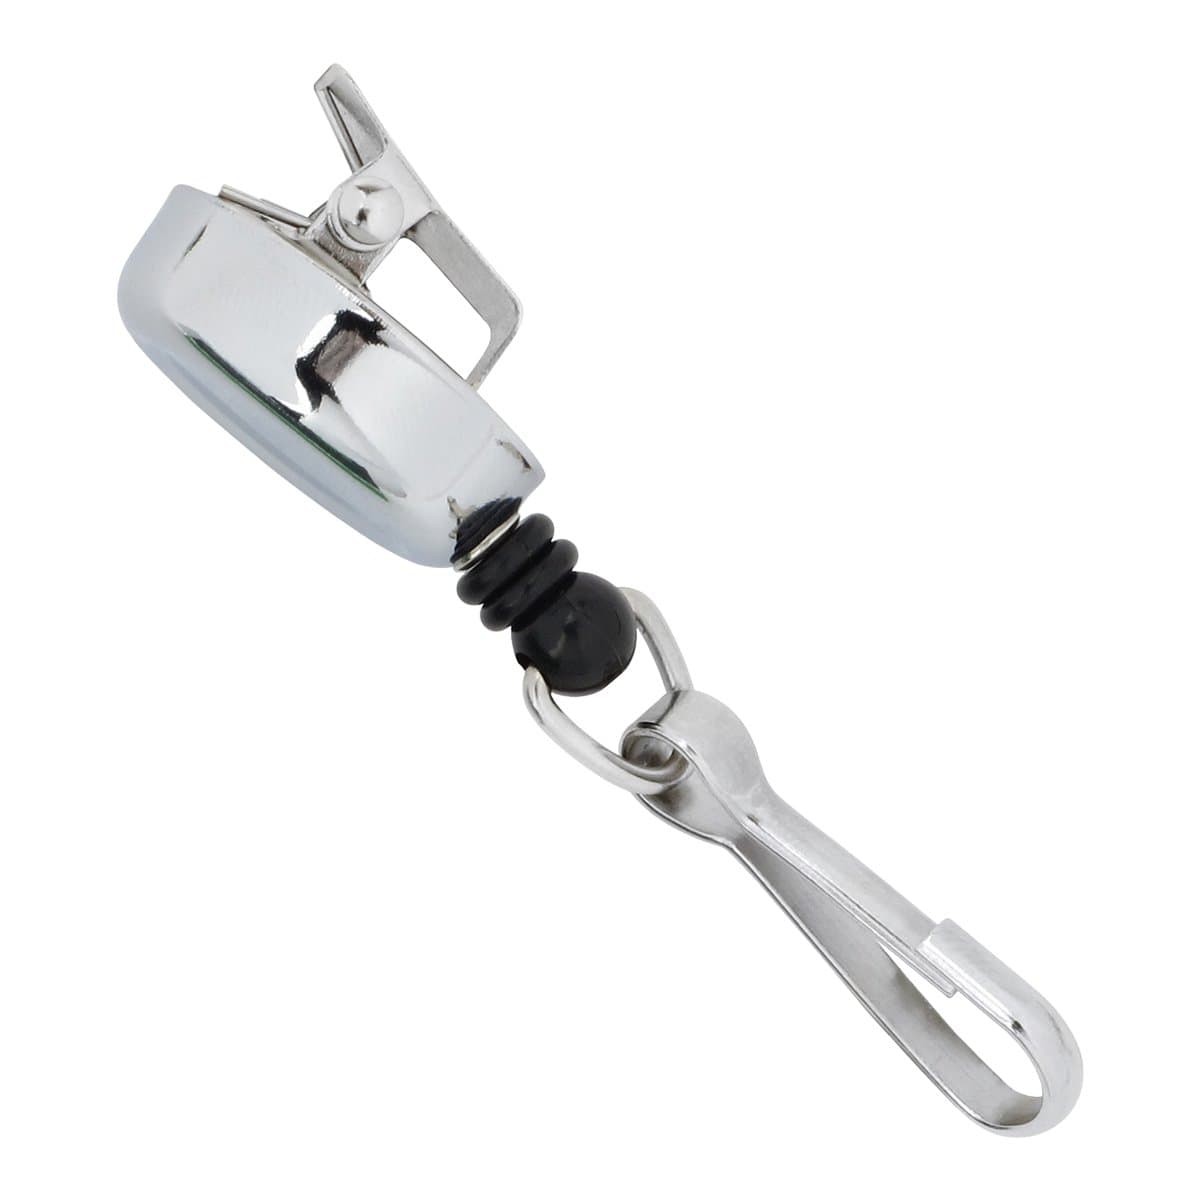 Mini Chrome Silver Key Reel With Spring Clip And Metal Swivel Hook (2120-3400) 2120-3400